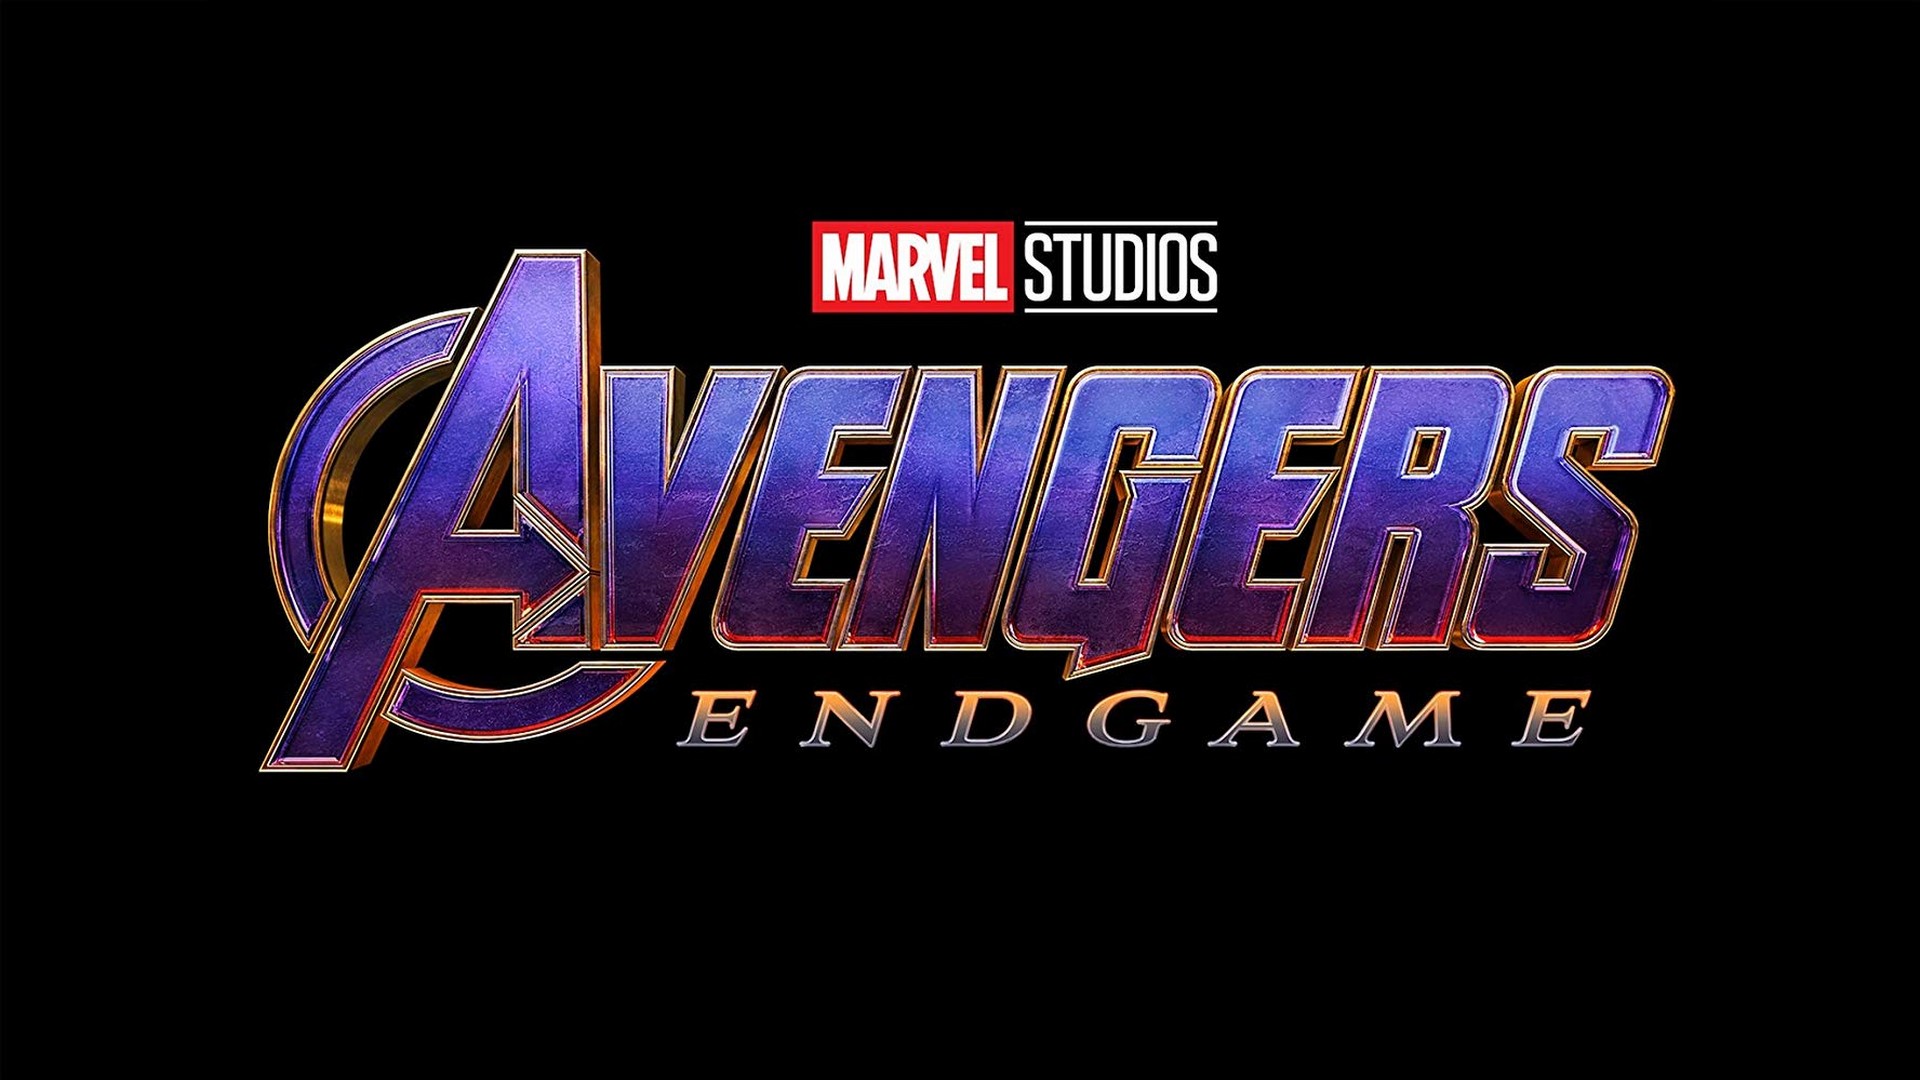 Avengers Endgame Wallpaper HD with high-resolution 1920x1080 pixel. You can use this poster wallpaper for your Desktop Computers, Mac Screensavers, Windows Backgrounds, iPhone Wallpapers, Tablet or Android Lock screen and another Mobile device